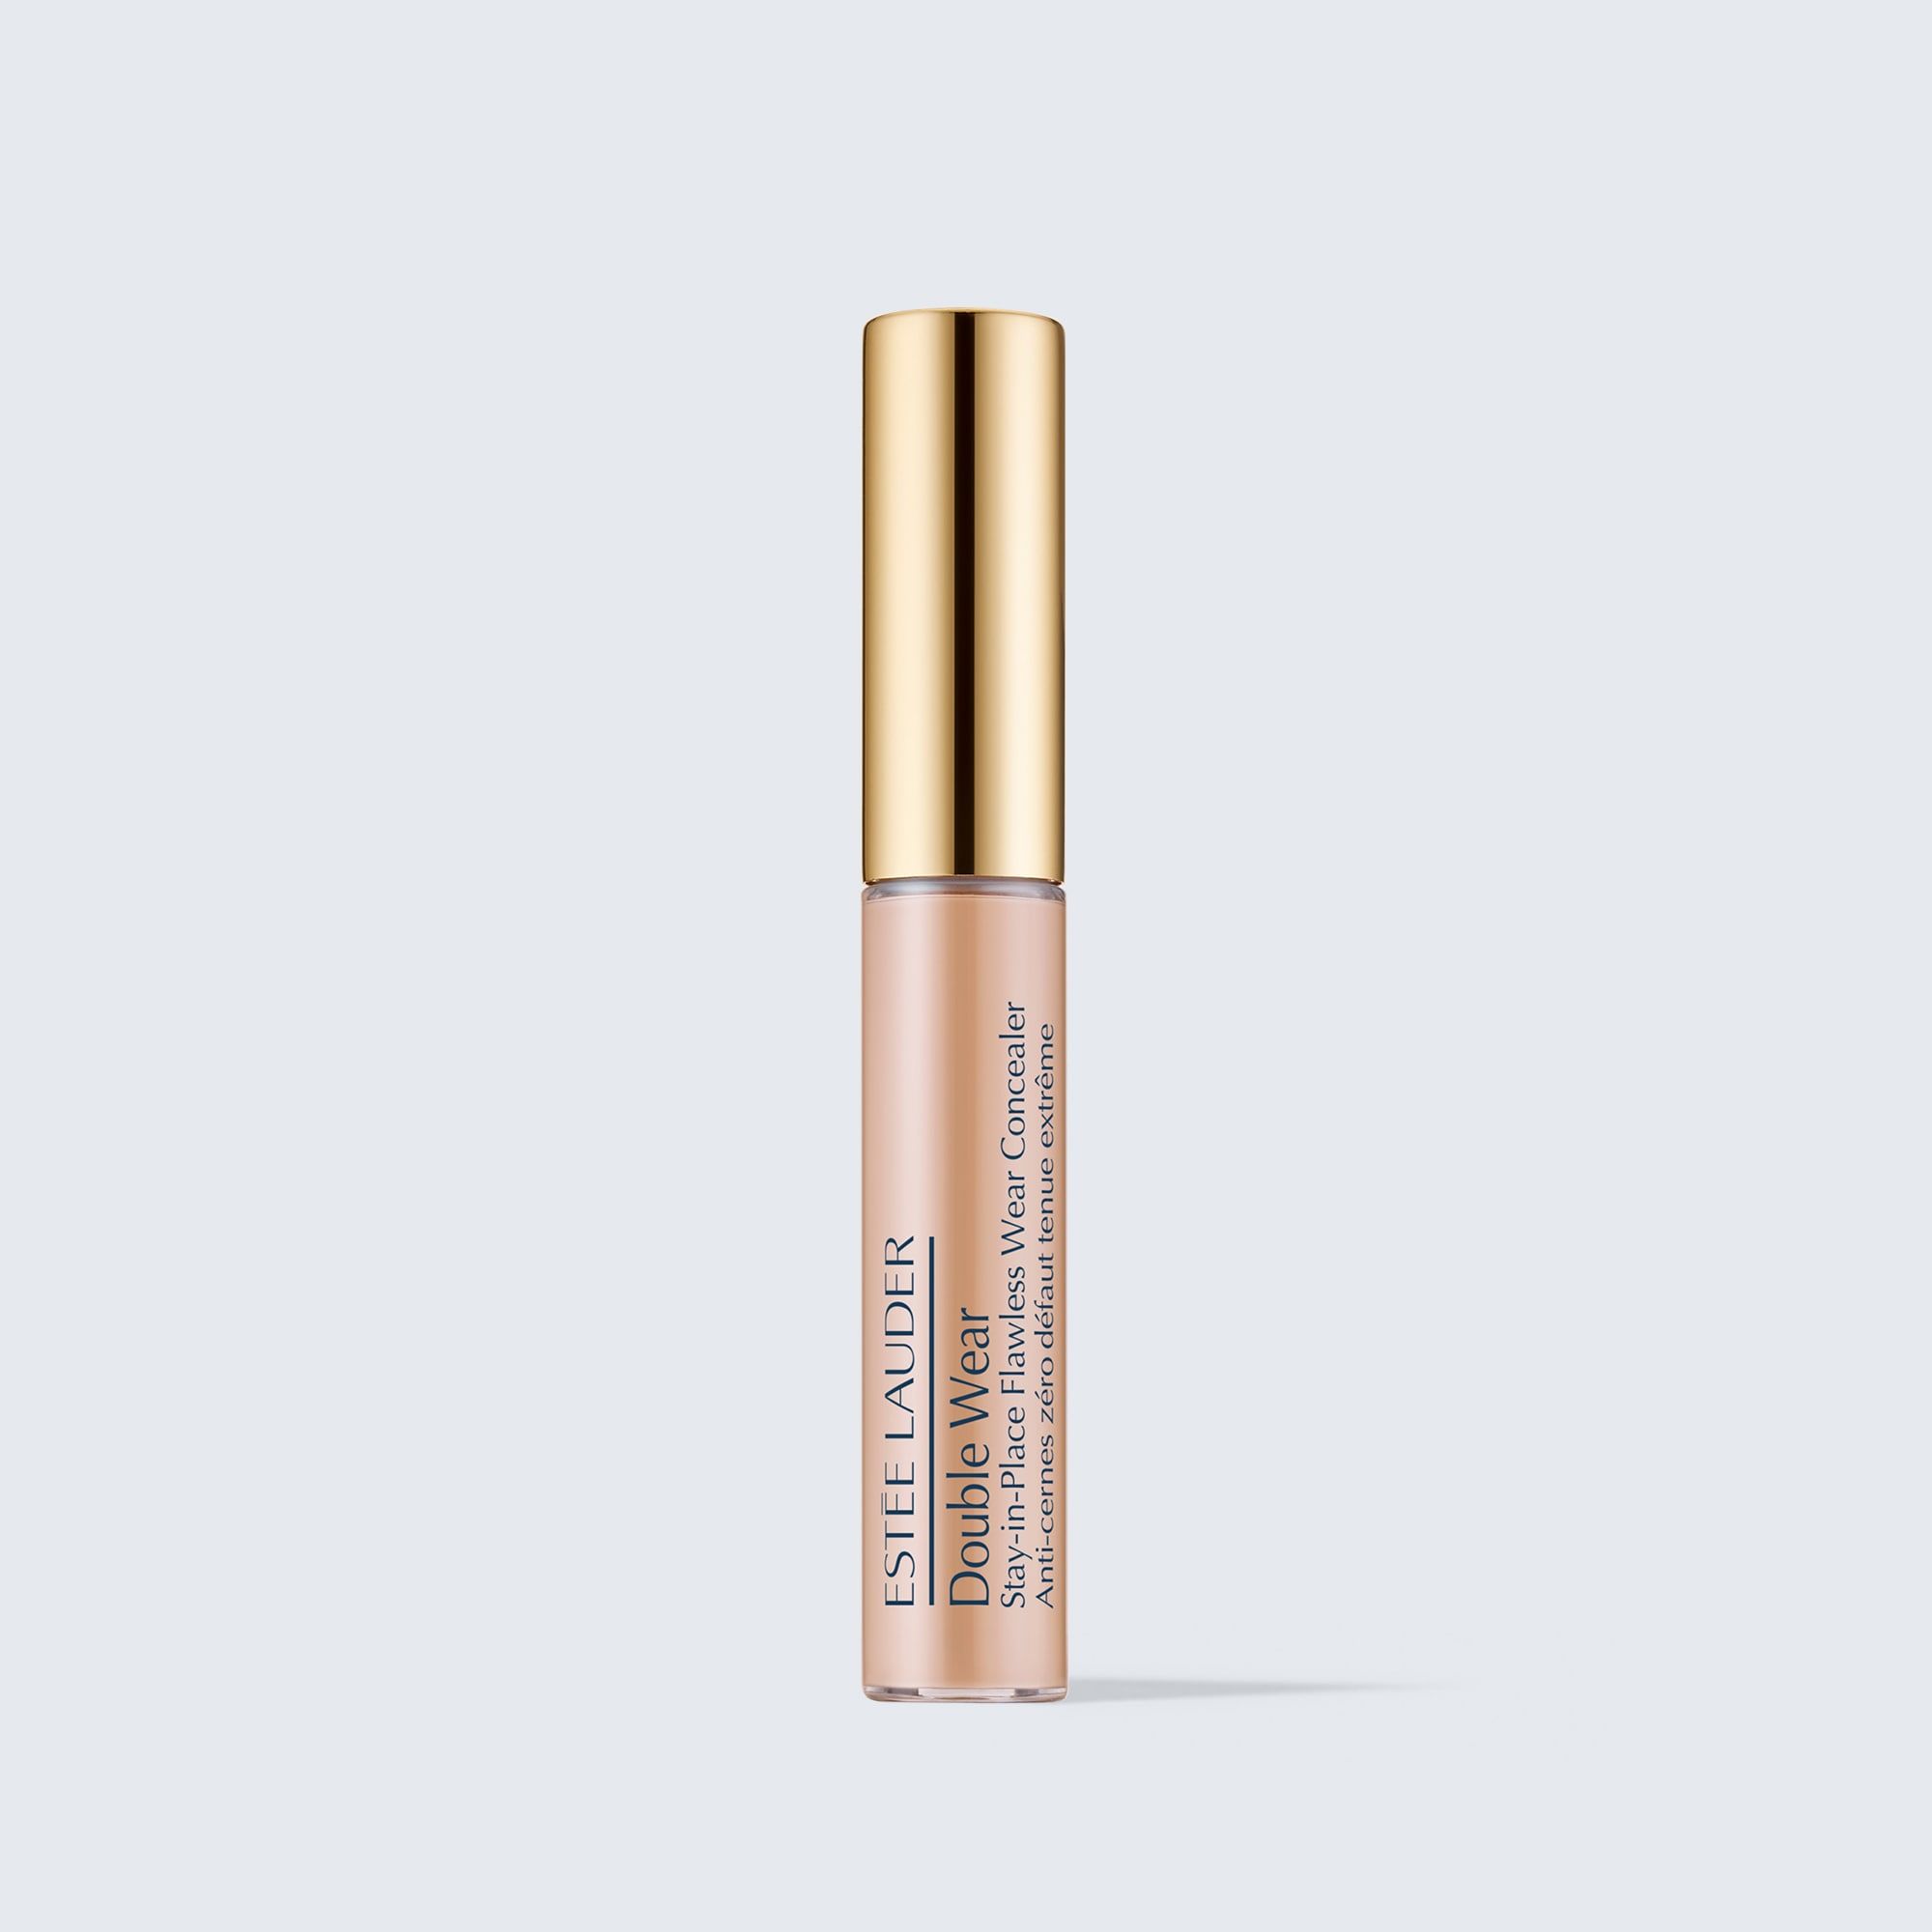 Консилер для лица Estee Lauder Double Wear Stay-In-Place, 1C Light, 7 мл